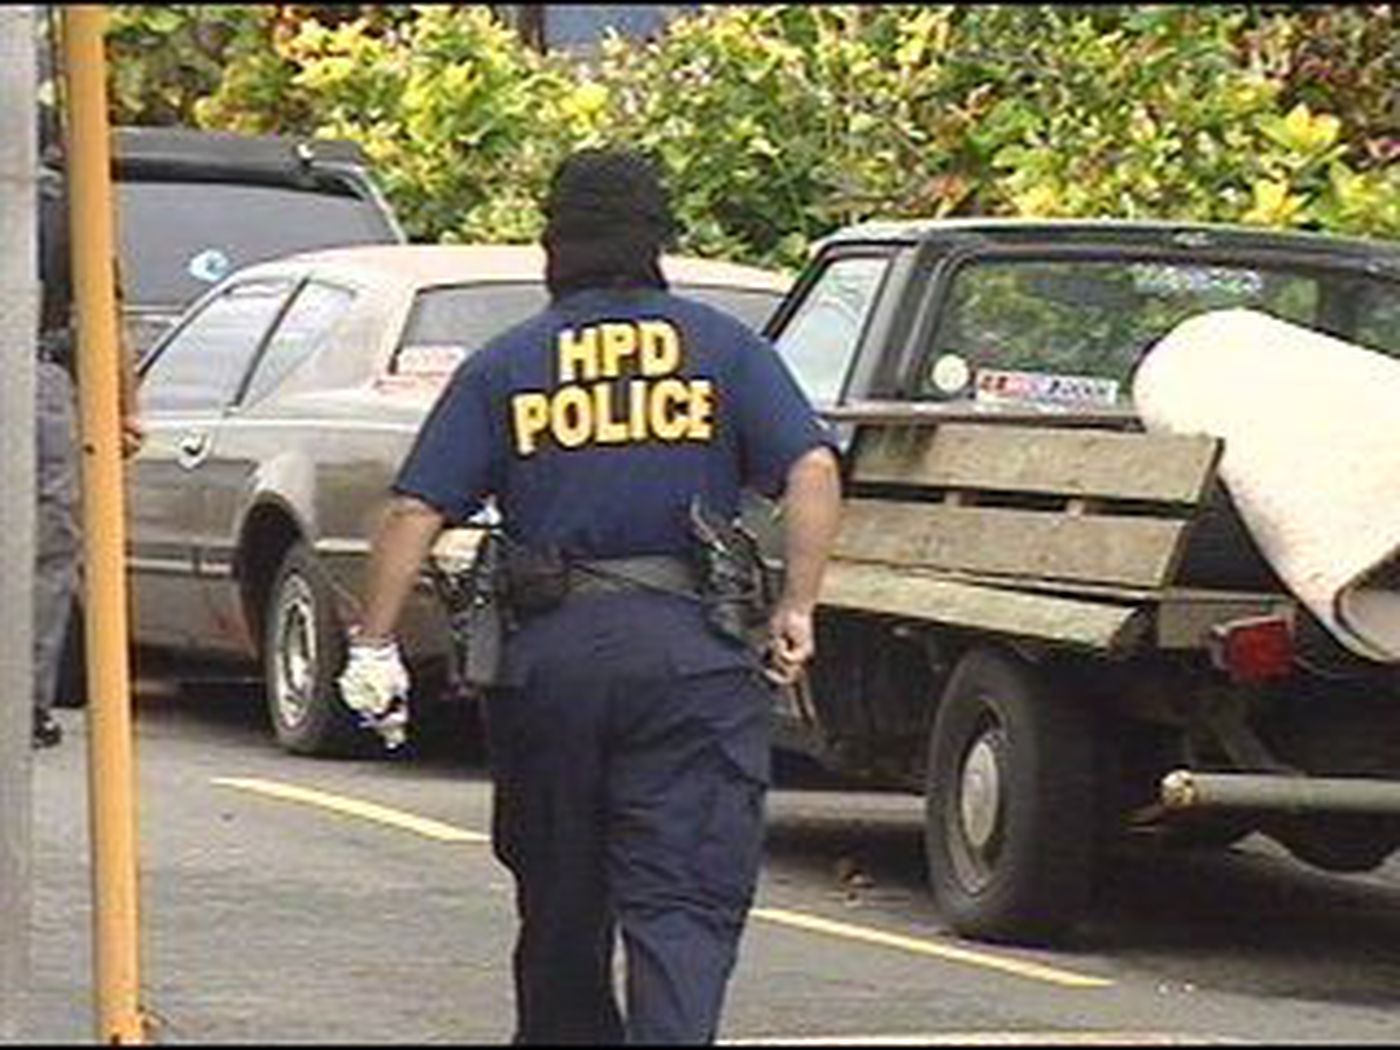 Exclusive: undercover officers question HPD